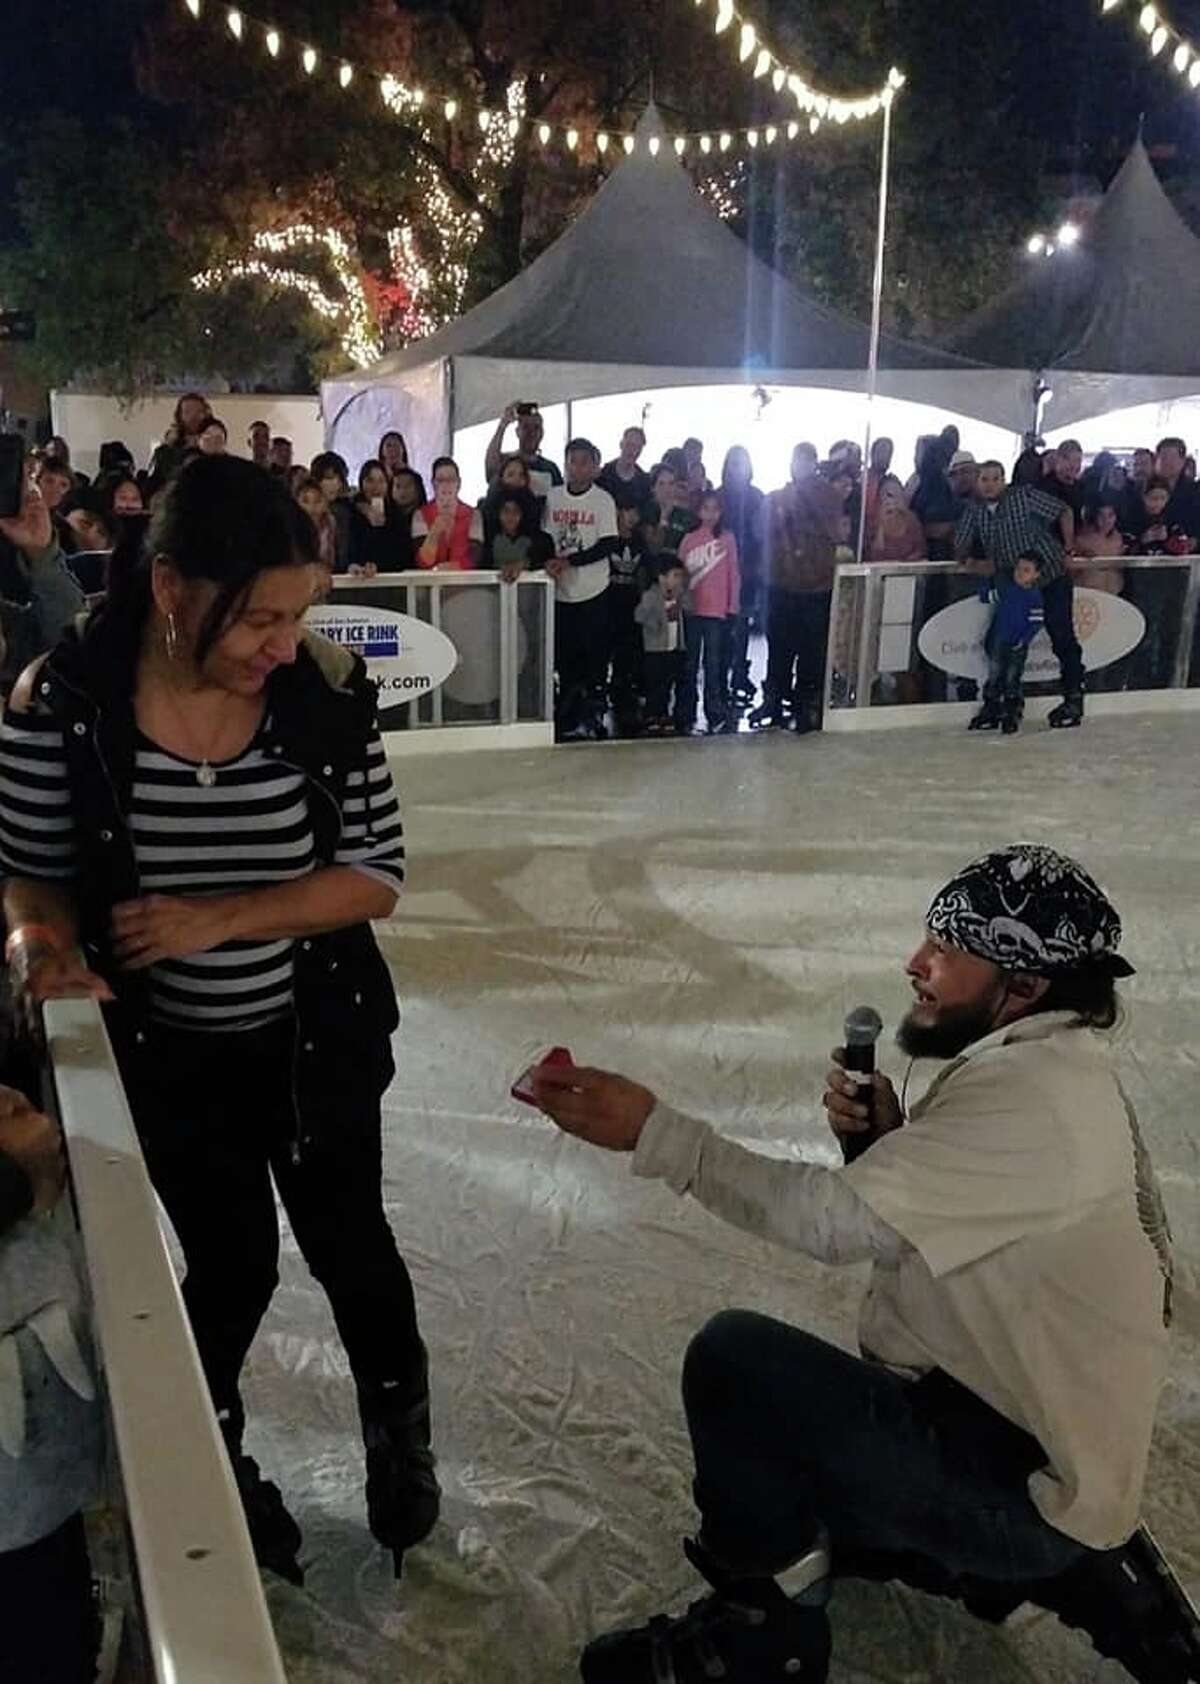 After being together for more than 11 years, Danny Torres, 43, proposed to his longtime girlfriend Chrissy Ruiz, 54, Sunday at the local outdoor ice skating rink that he helped build at Travis Park.